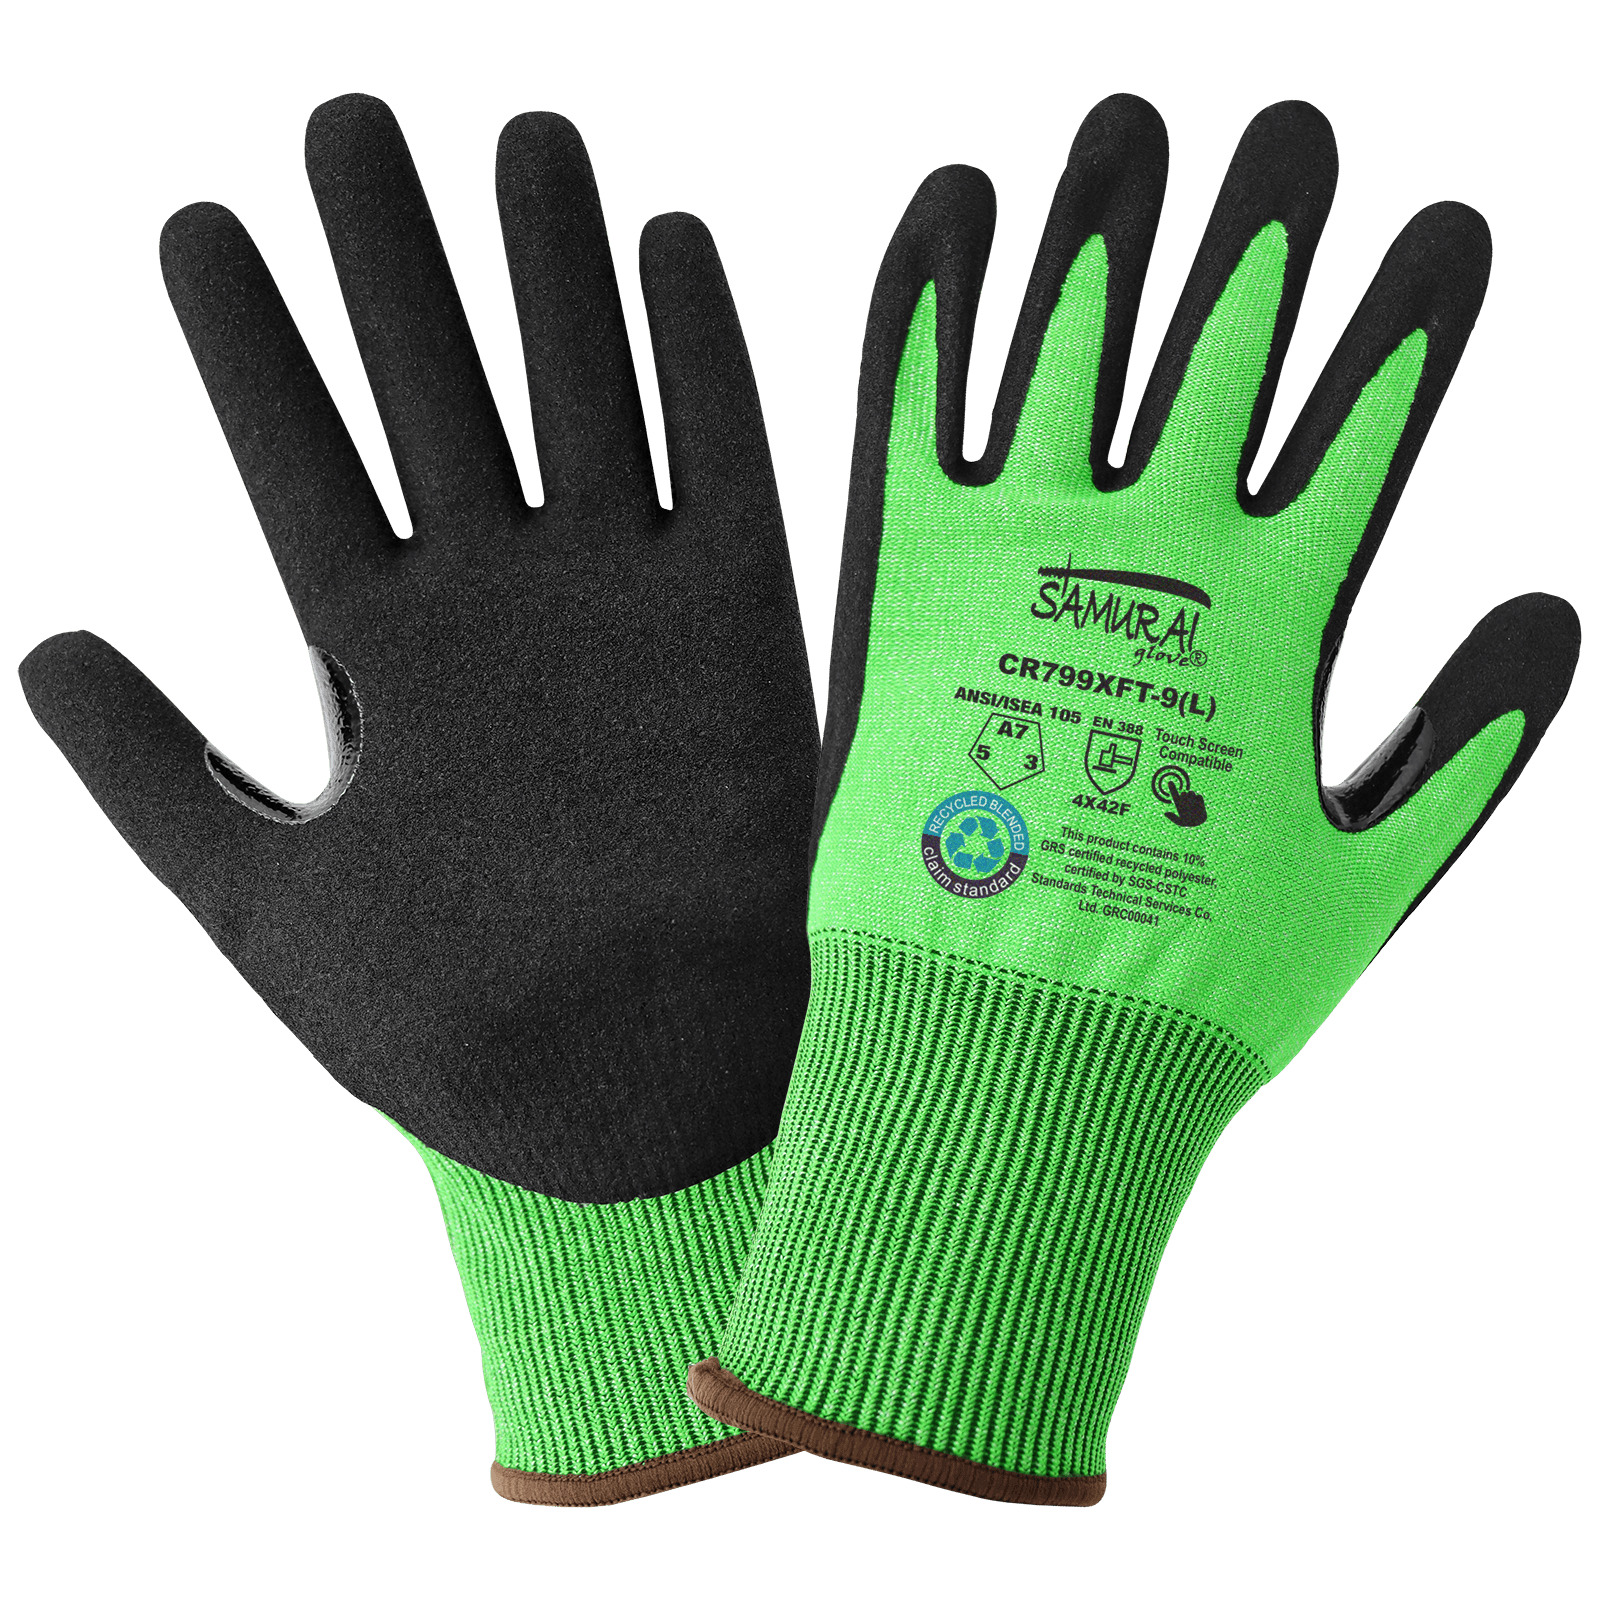 Samurai Glove® Hi-Viz Nitrile Coated rPET Recycled Cut Resistant Gloves with Touch Screen Fingers